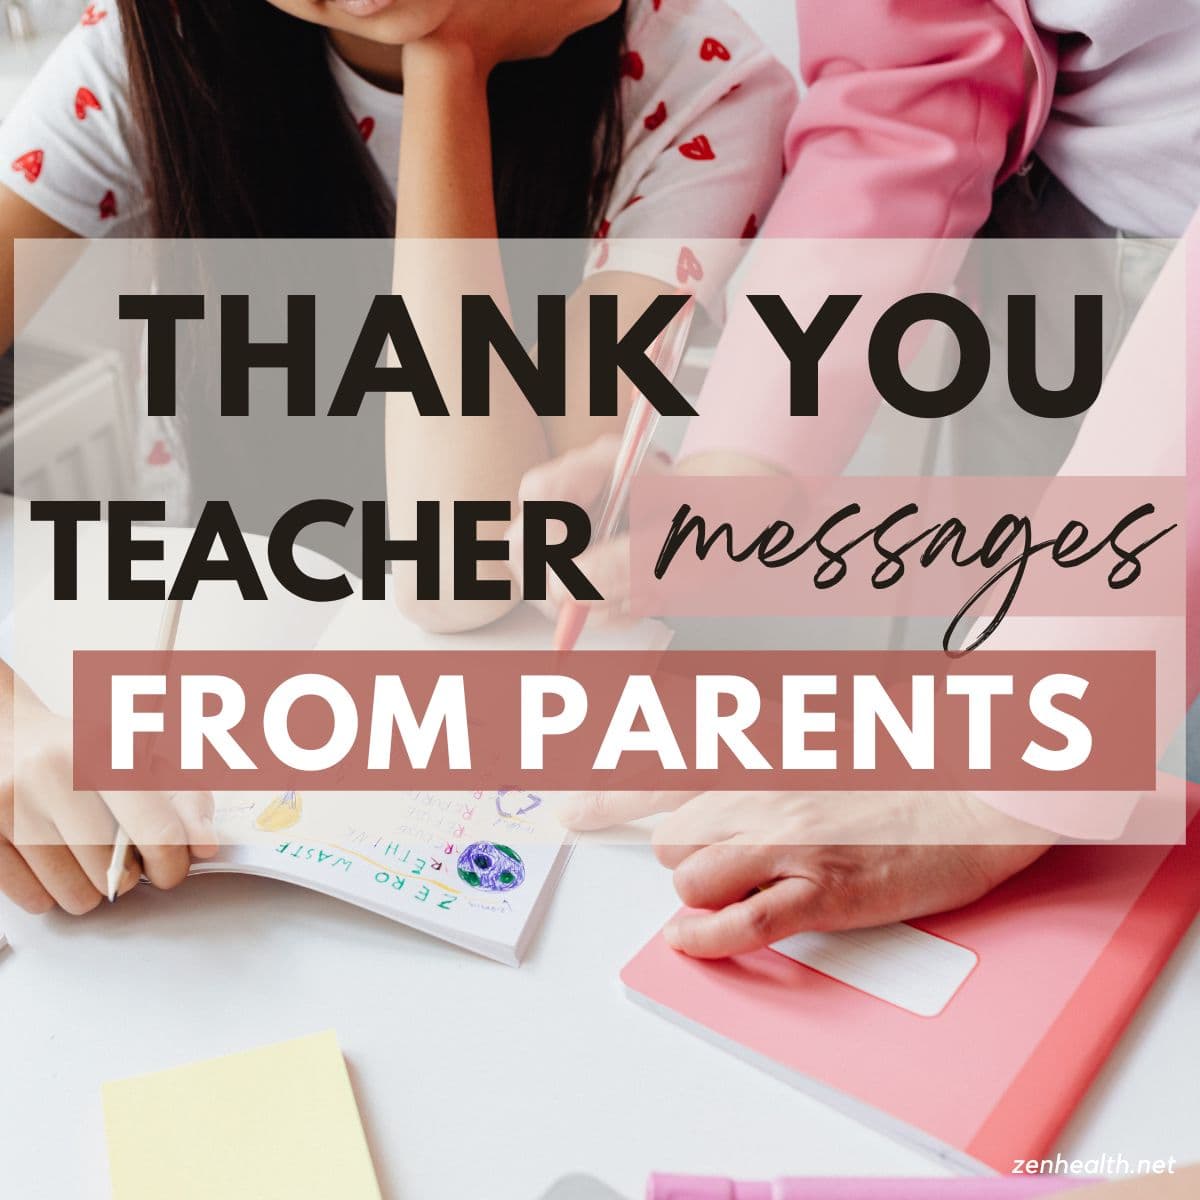 thank you teacher messages from parents text overlay on a photo of a student with their book open and a teacher helping